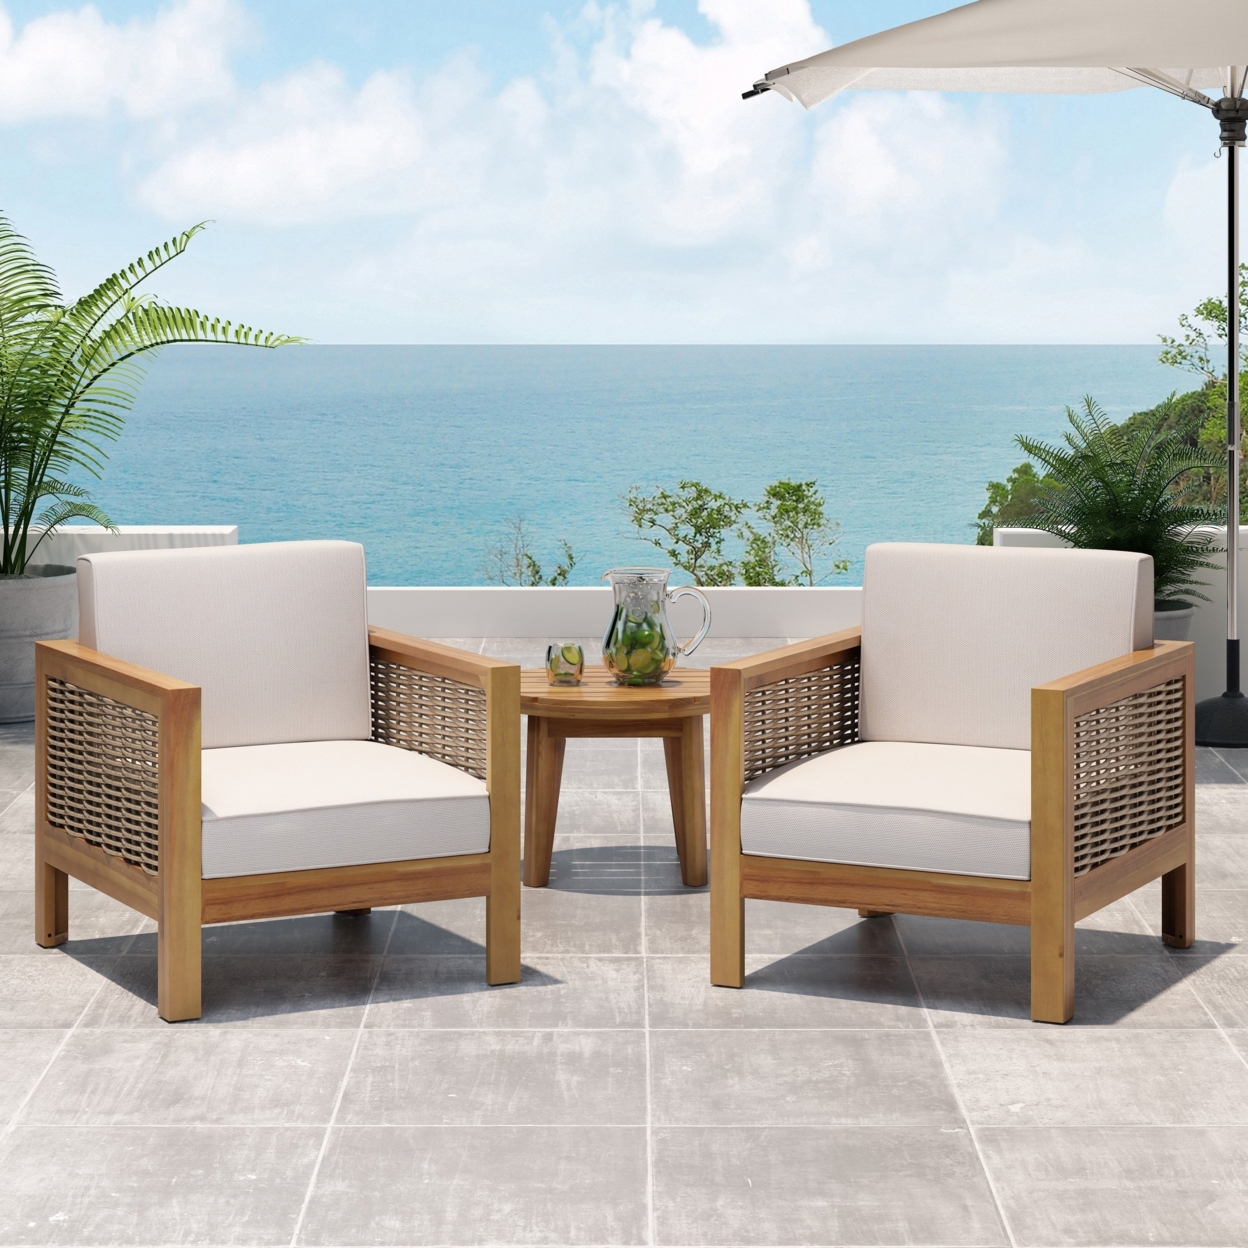 Mayes Outdoor Acacia Wood Club Chair With Wicker Accents (Set Of 2) - Gray/mixed Gray/dark Gray